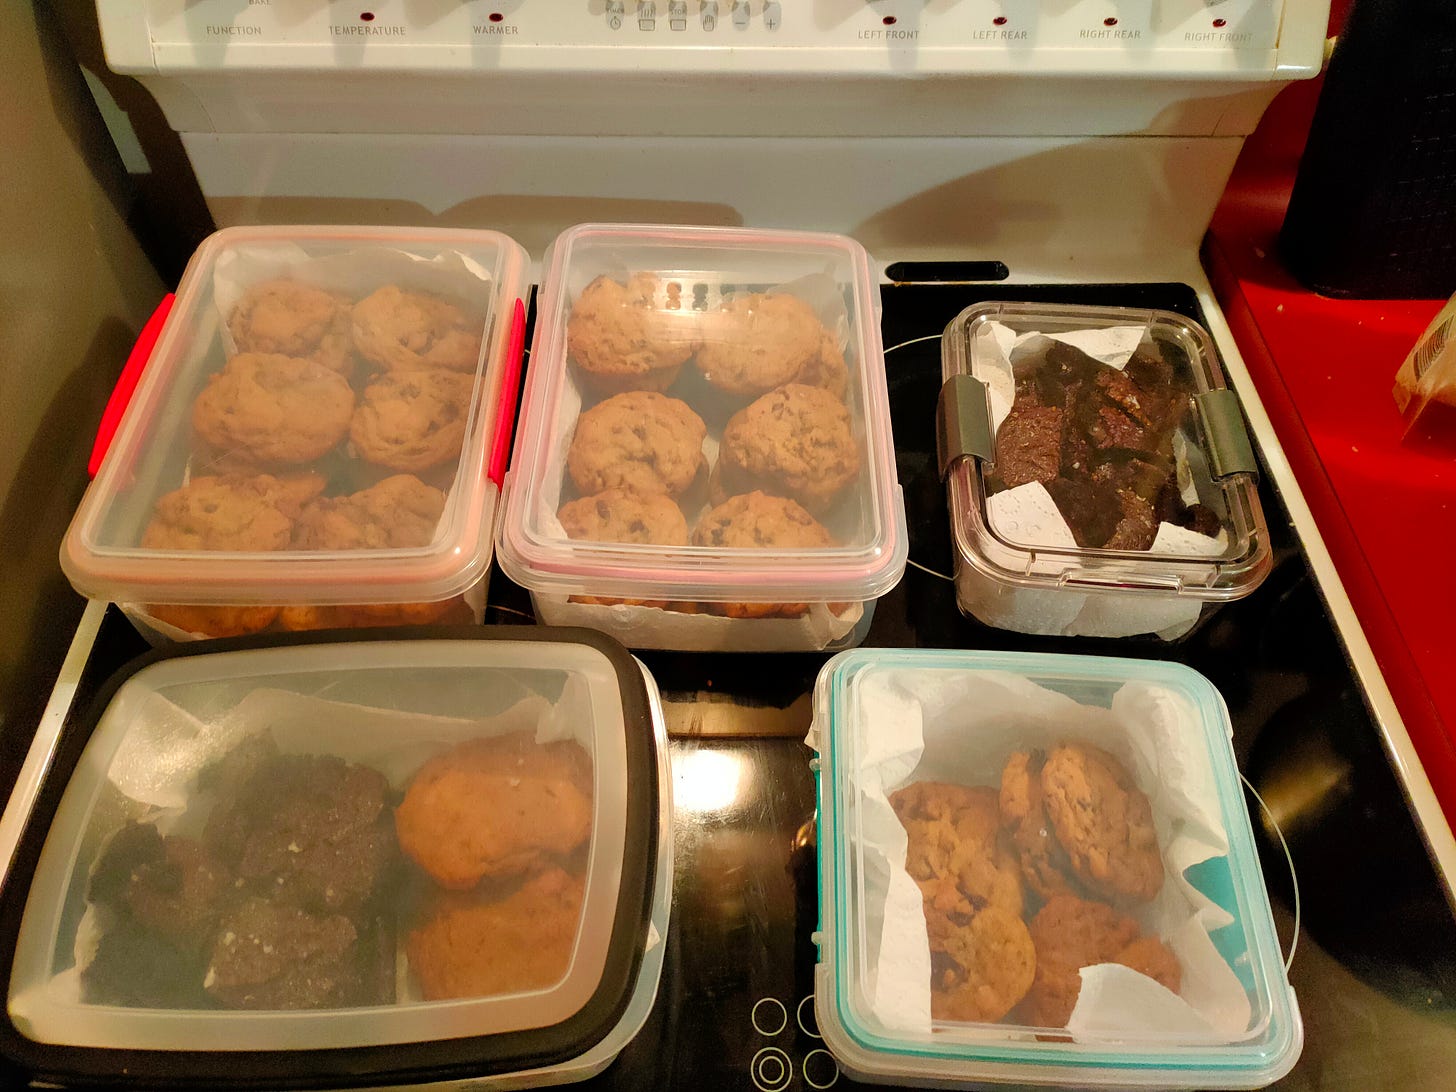 Five plastic containers filled with chocolate chip cookies and brownies